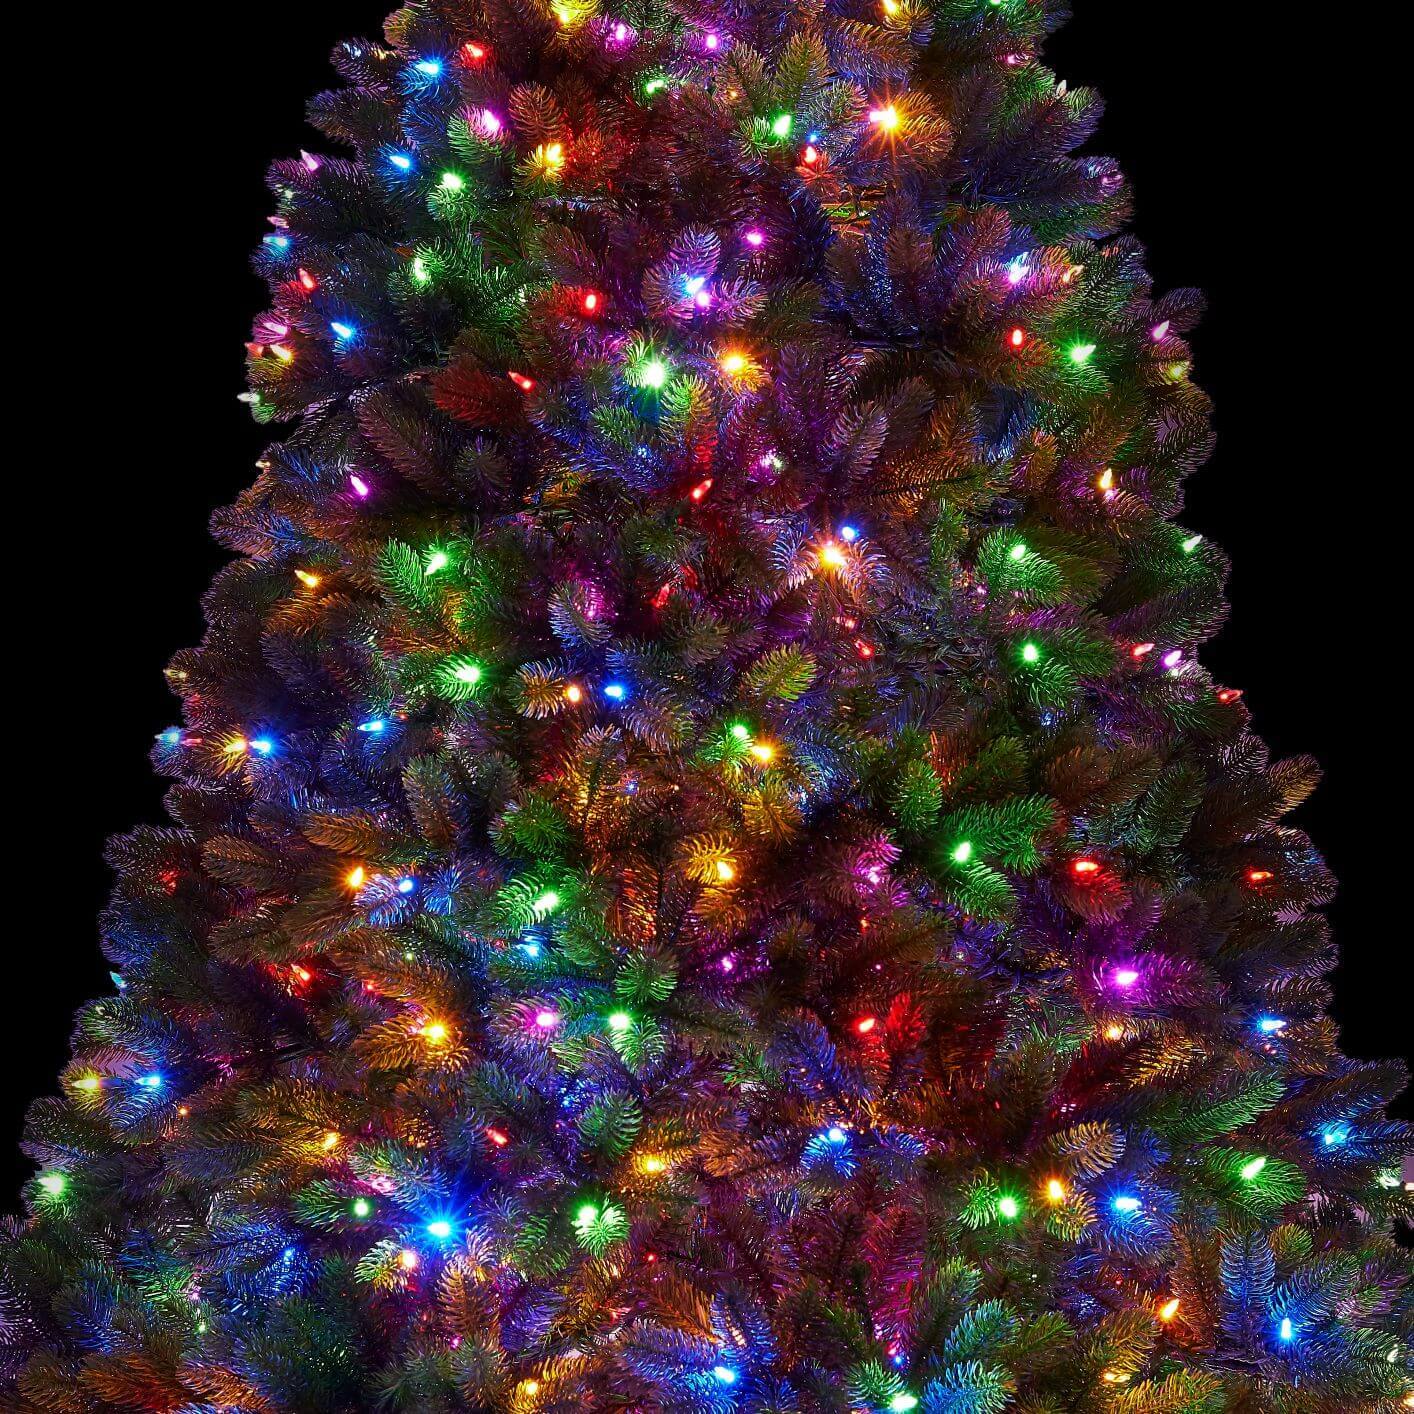 King of Christmas 10' Royal Fir Quick-Shape Artificial Christmas Tree with 1600 Warm White & Multi-Color LED Lights